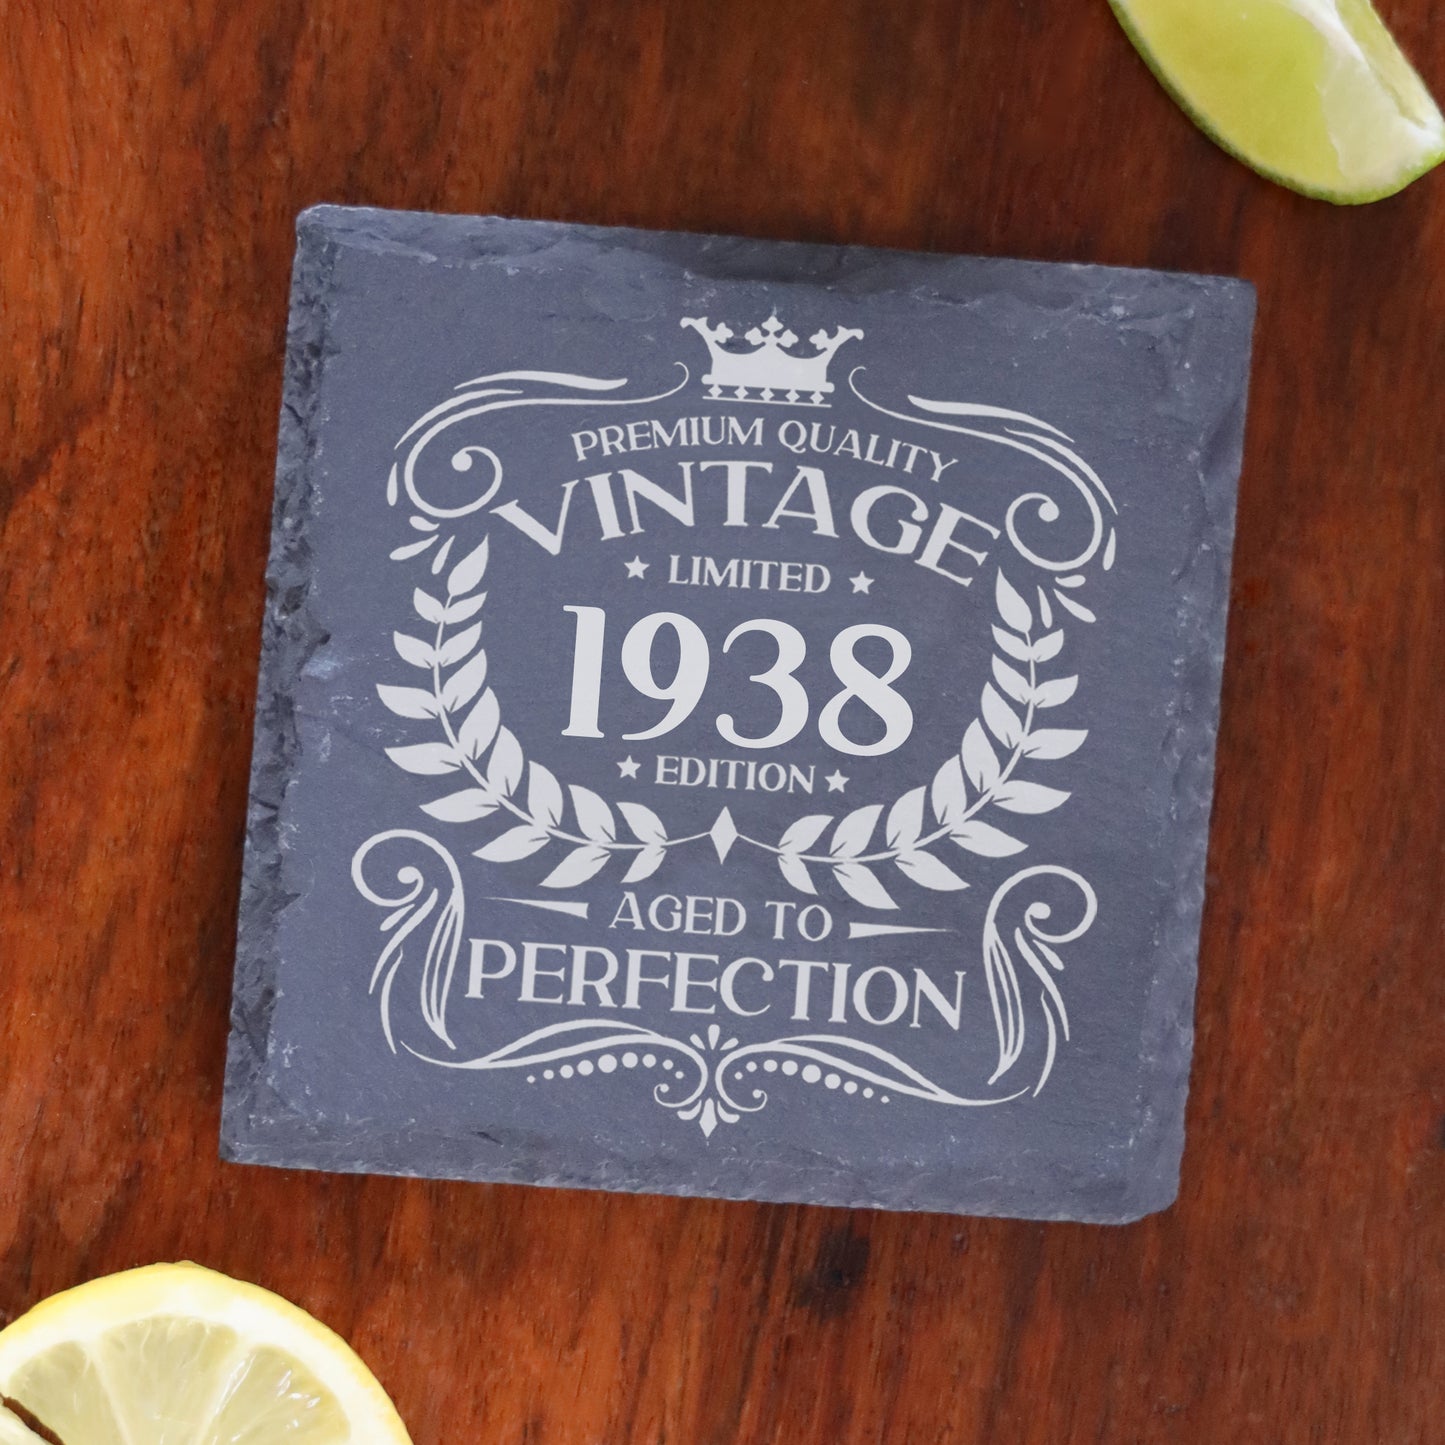 Vintage 1938 85th Birthday Engraved Gin Glass Gift  - Always Looking Good - Square Coaster Only  